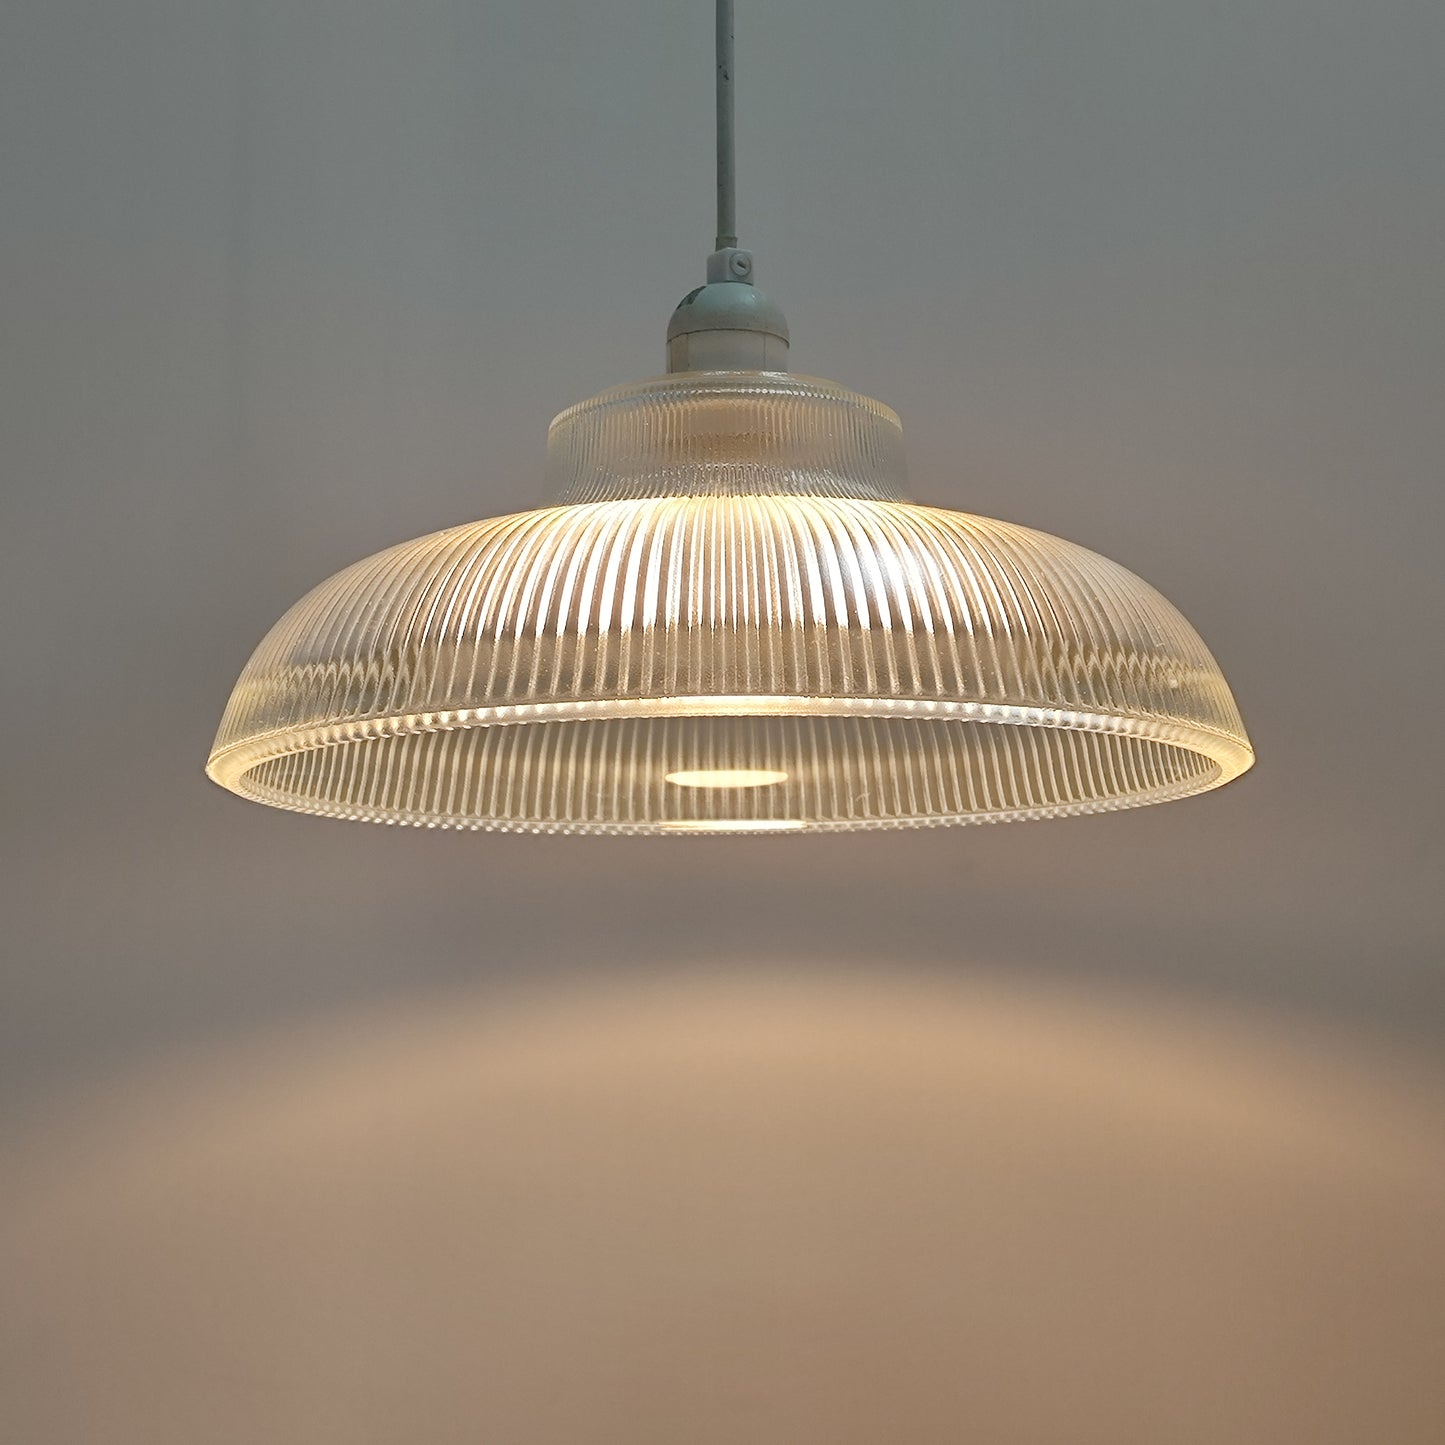 Glass lighting has proven very popular in the lighting sector, and we are extremely happy to introduce the Jacinta to our range. Our ribbed glass easy fit light pendant is a very attractive light fitting and easy fit means you can give your room a makeover by simply attaching it to an existing light fitting. 